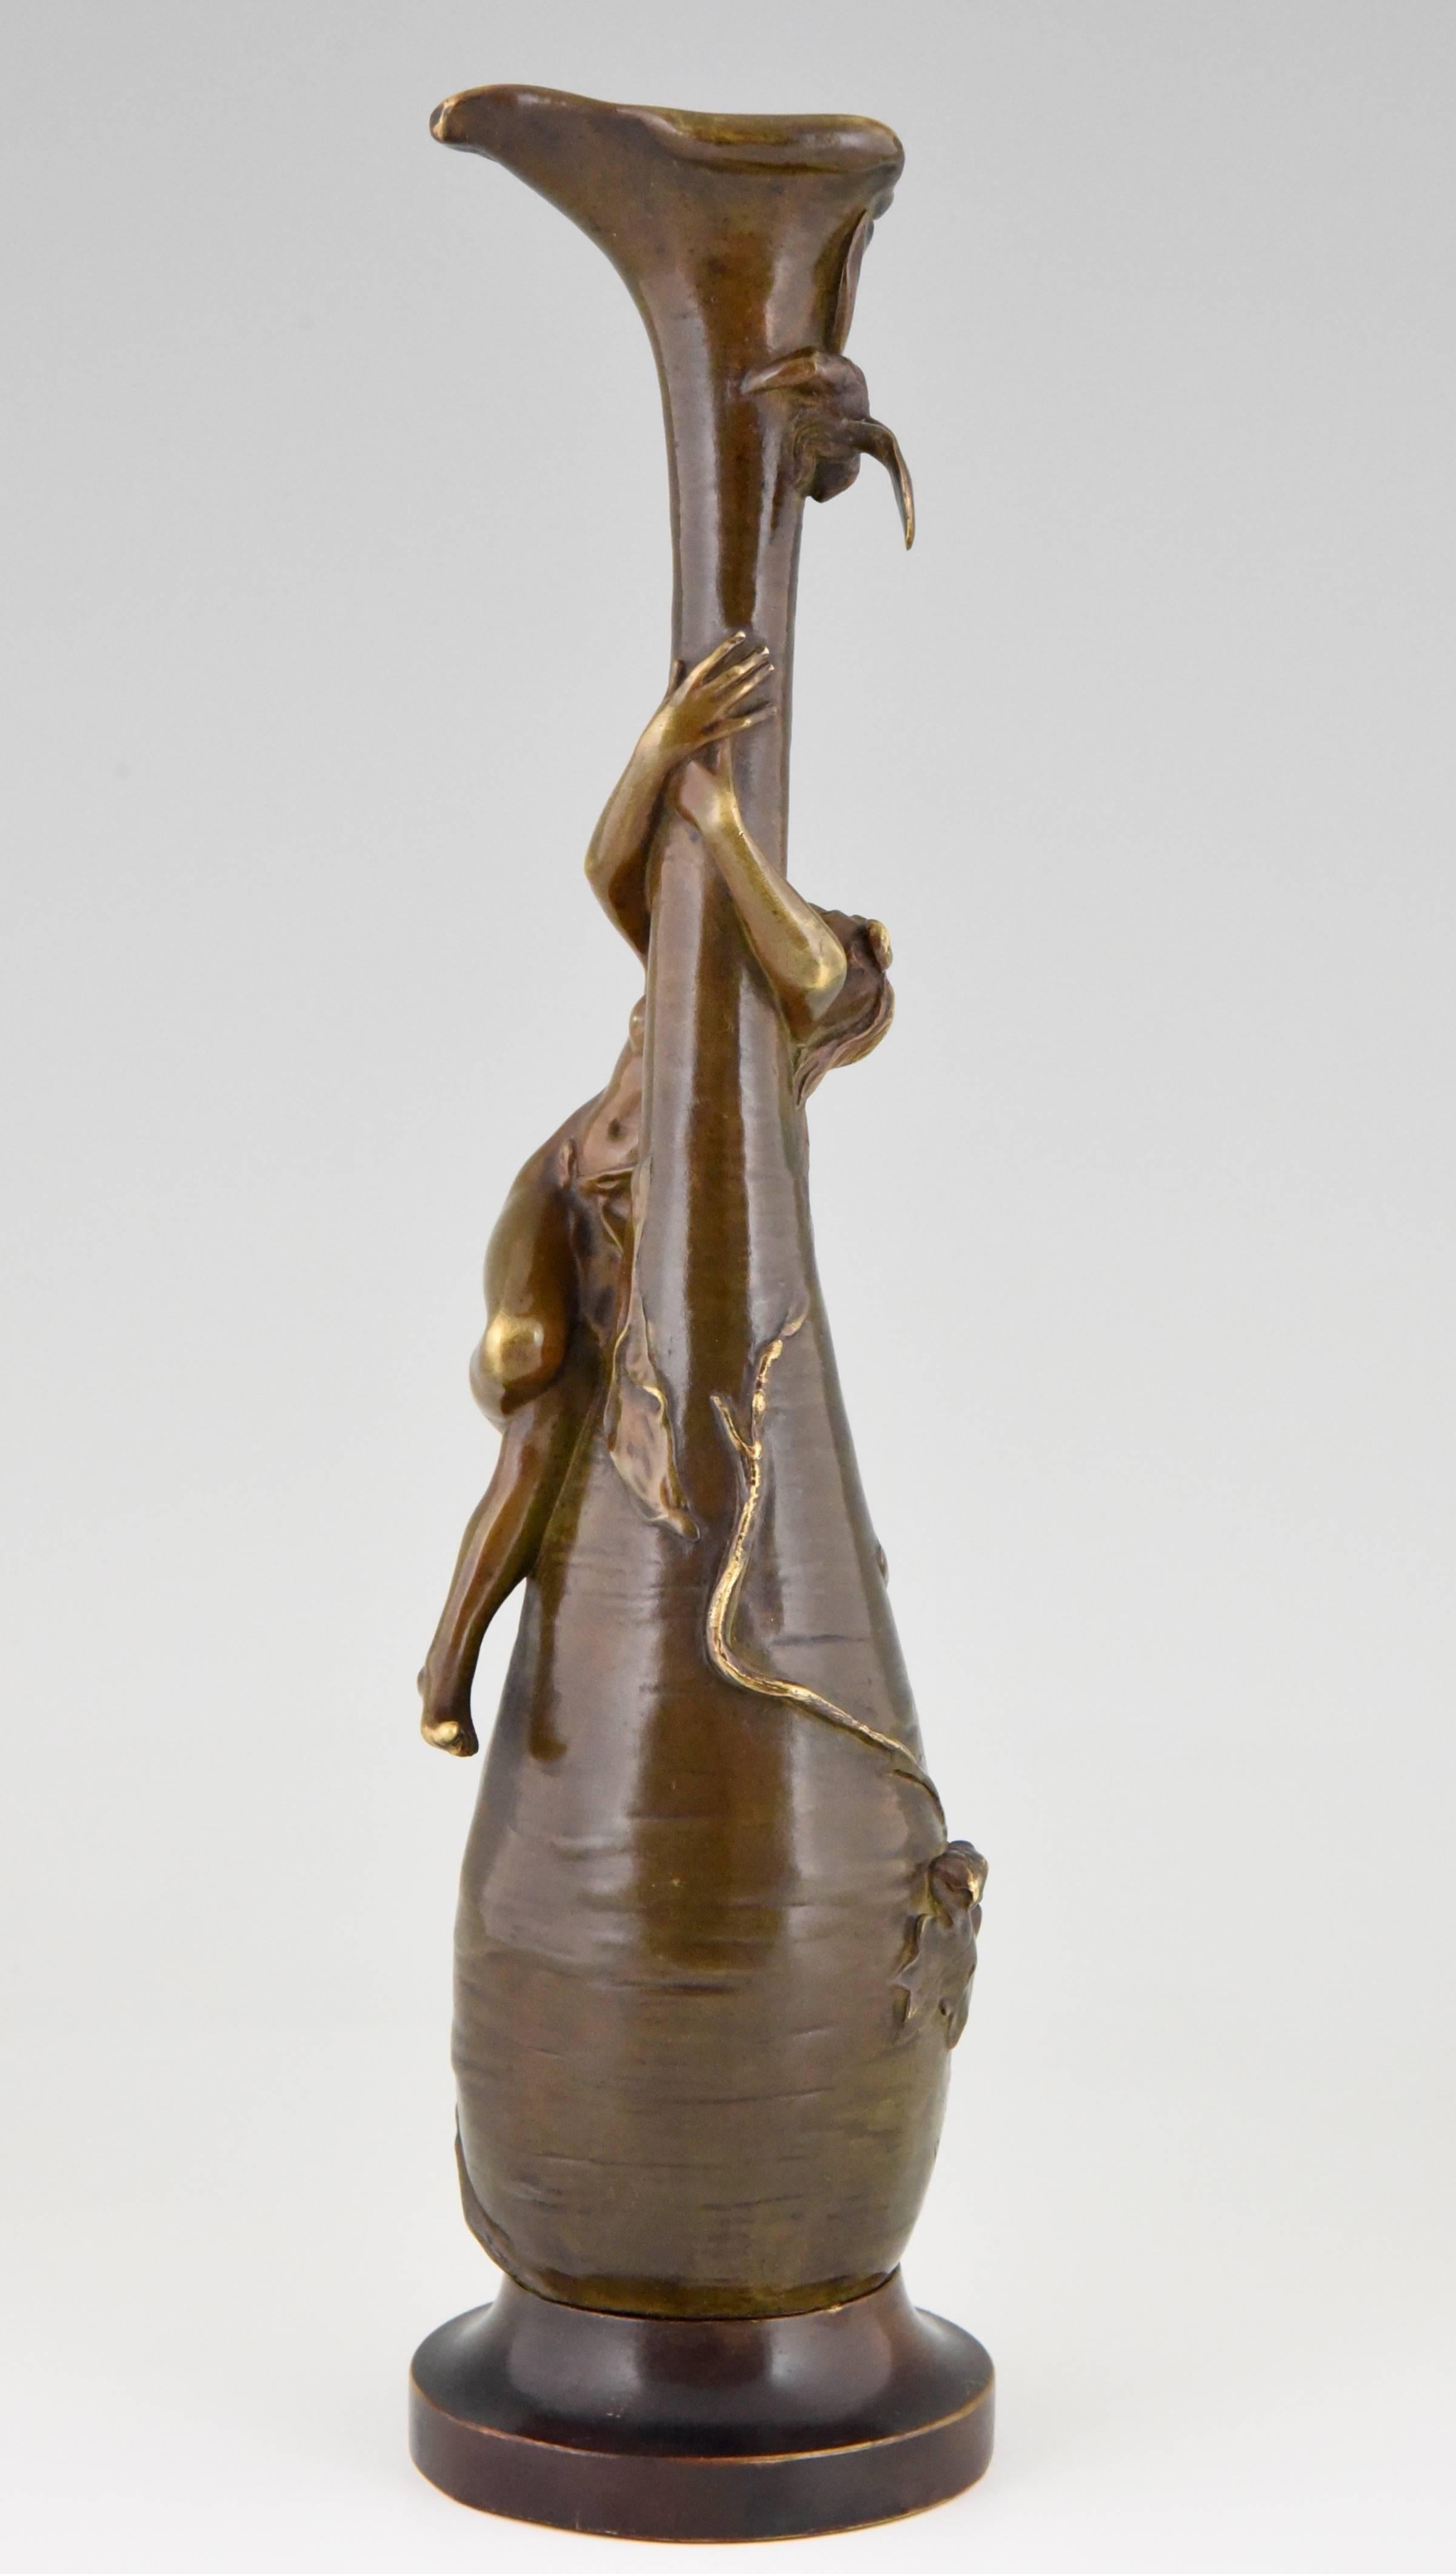 20th Century French bronze sculptural Art Nouveau vase with nude by Antoine Bofill 1900